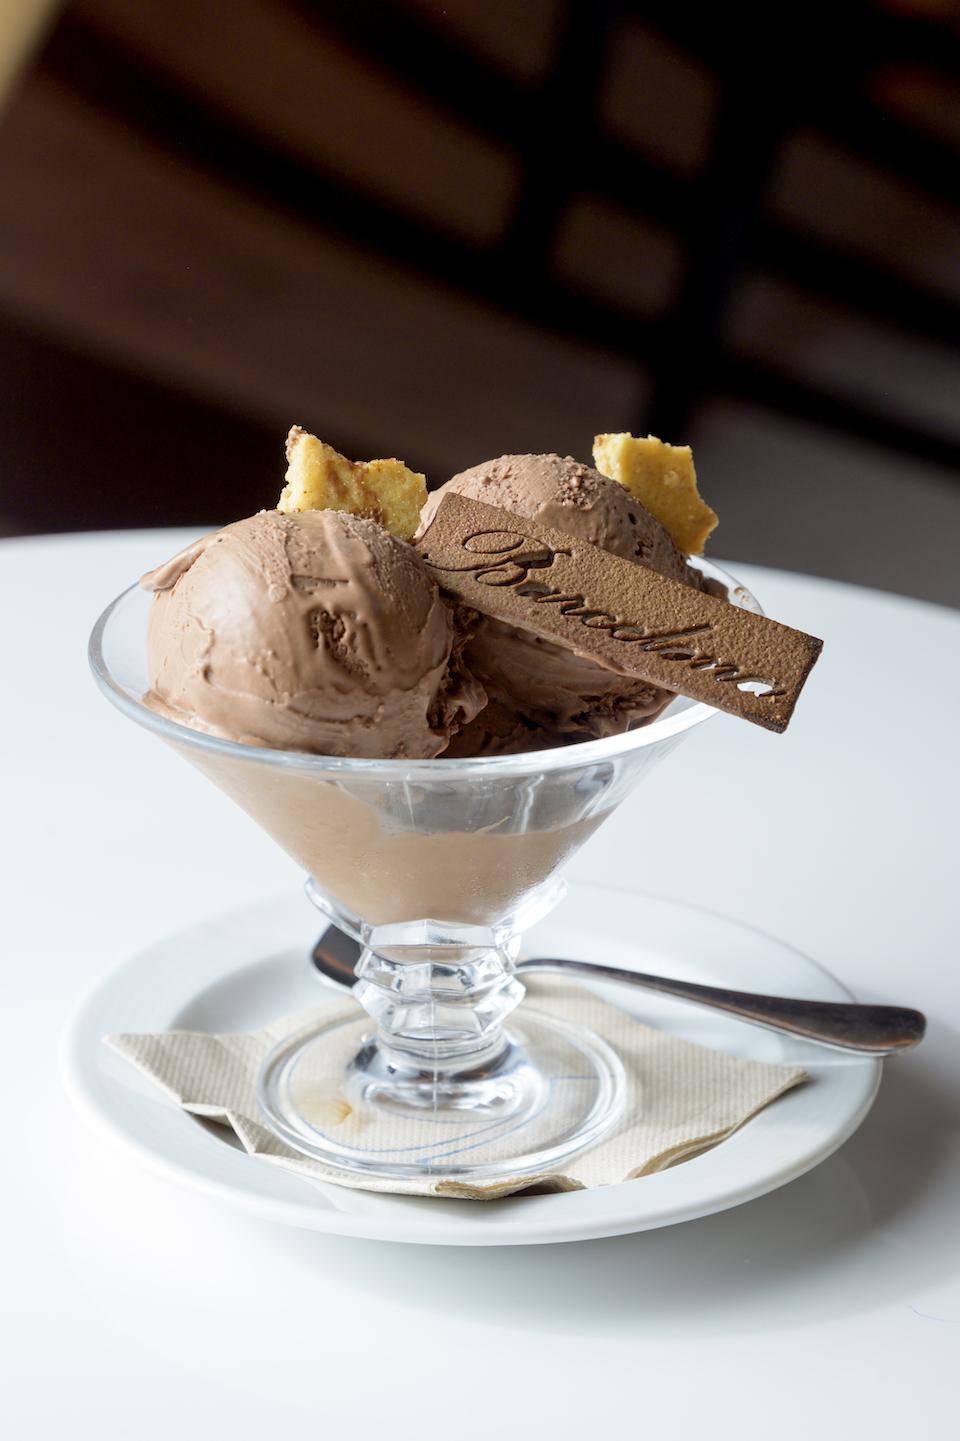 Chocolate Gelato created to celebrate the ship's stop in Barcelona